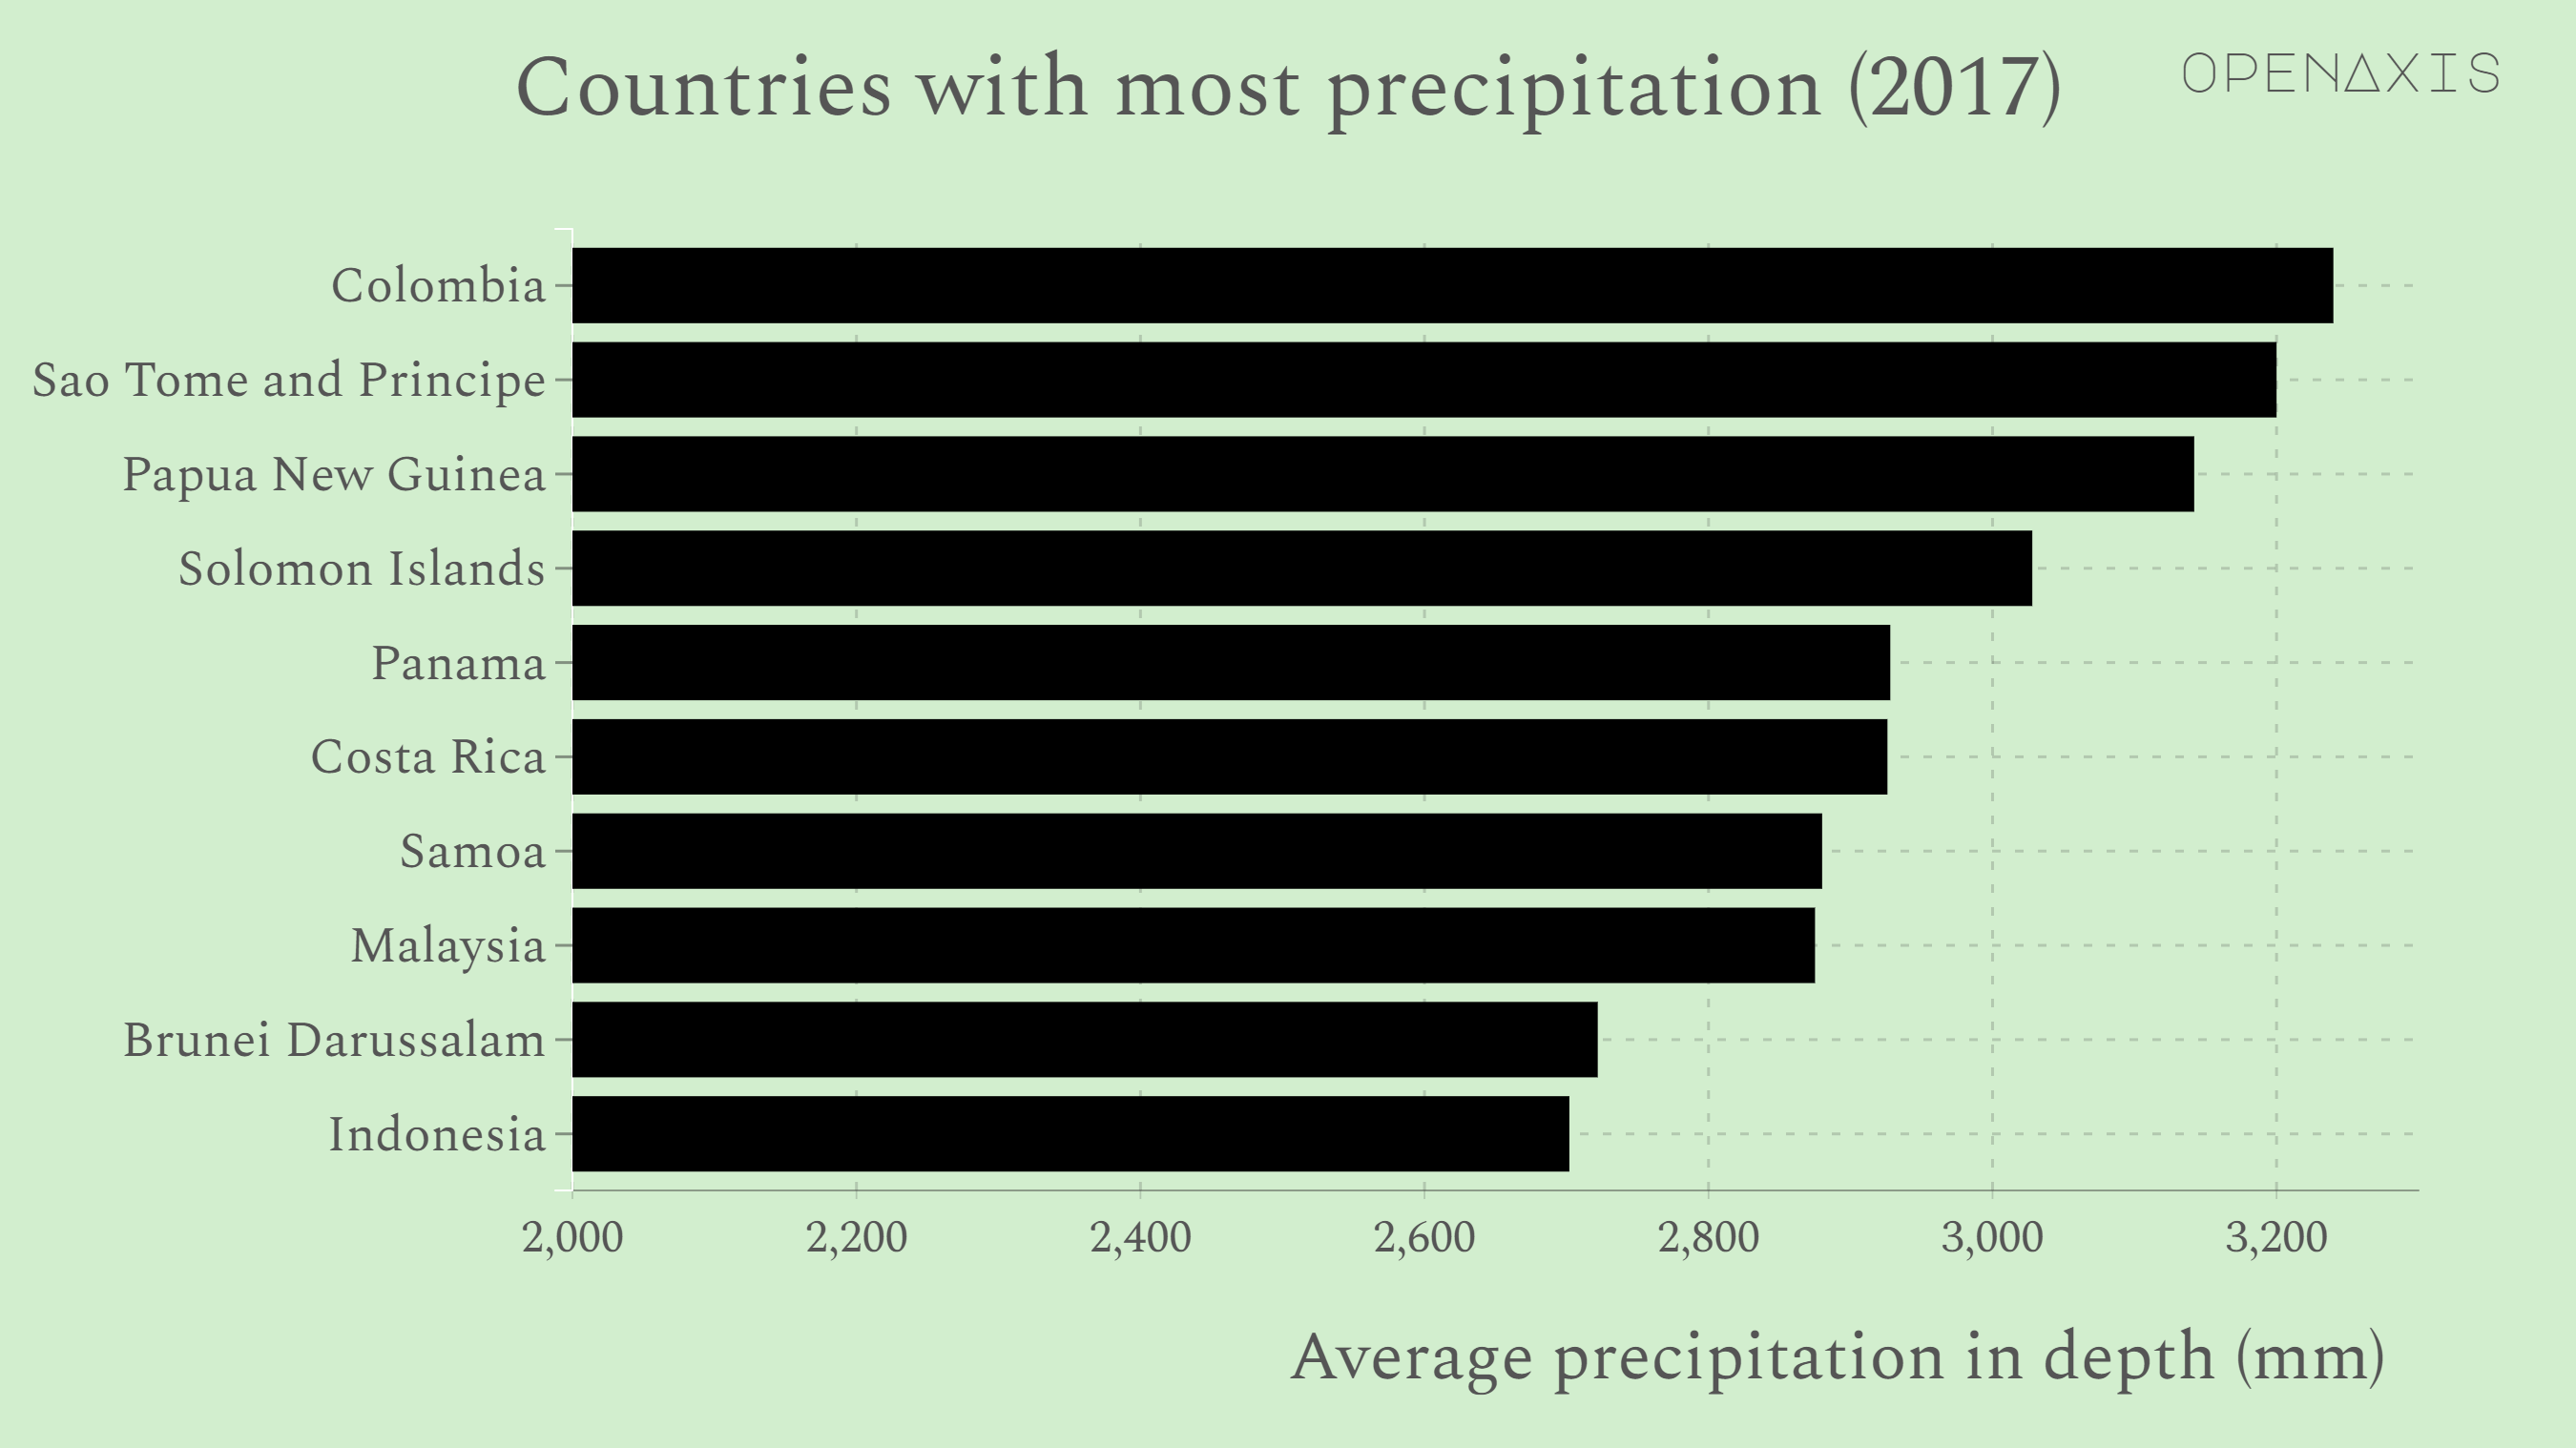 <p>Average precipitation is the long-term average in depth (over space and time) of annual precipitation in the country. Precipitation is defined as any kind of water that falls from clouds as a liquid or a solid.</p><p><br /></p><p>Colombia has the highest rate of precipitation which is estimated to be 3240 millimeters per year as of 2017.</p><p><br /></p><p><span data-index="0" data-denotation-char data-id="0" data-value="&lt;a href=&quot;/search?q=%23precipitation&quot; target=_self&gt;#precipitation" data-link="/search?q=%23precipitation">﻿<span contenteditable="false"><span></span><a href="/search?q=%23precipitation" target="_self">#precipitation</a></span>﻿</span> <span data-index="0" data-denotation-char data-id="0" data-value="&lt;a href=&quot;/search?q=%23weather&quot; target=_self&gt;#weather" data-link="/search?q=%23weather">﻿<span contenteditable="false"><span></span><a href="/search?q=%23weather" target="_self">#weather</a></span>﻿</span></p><p><br /></p><p>Source: <a href="/data/3888" target="_blank">World Bank, FAO</a></p><p><br /></p>